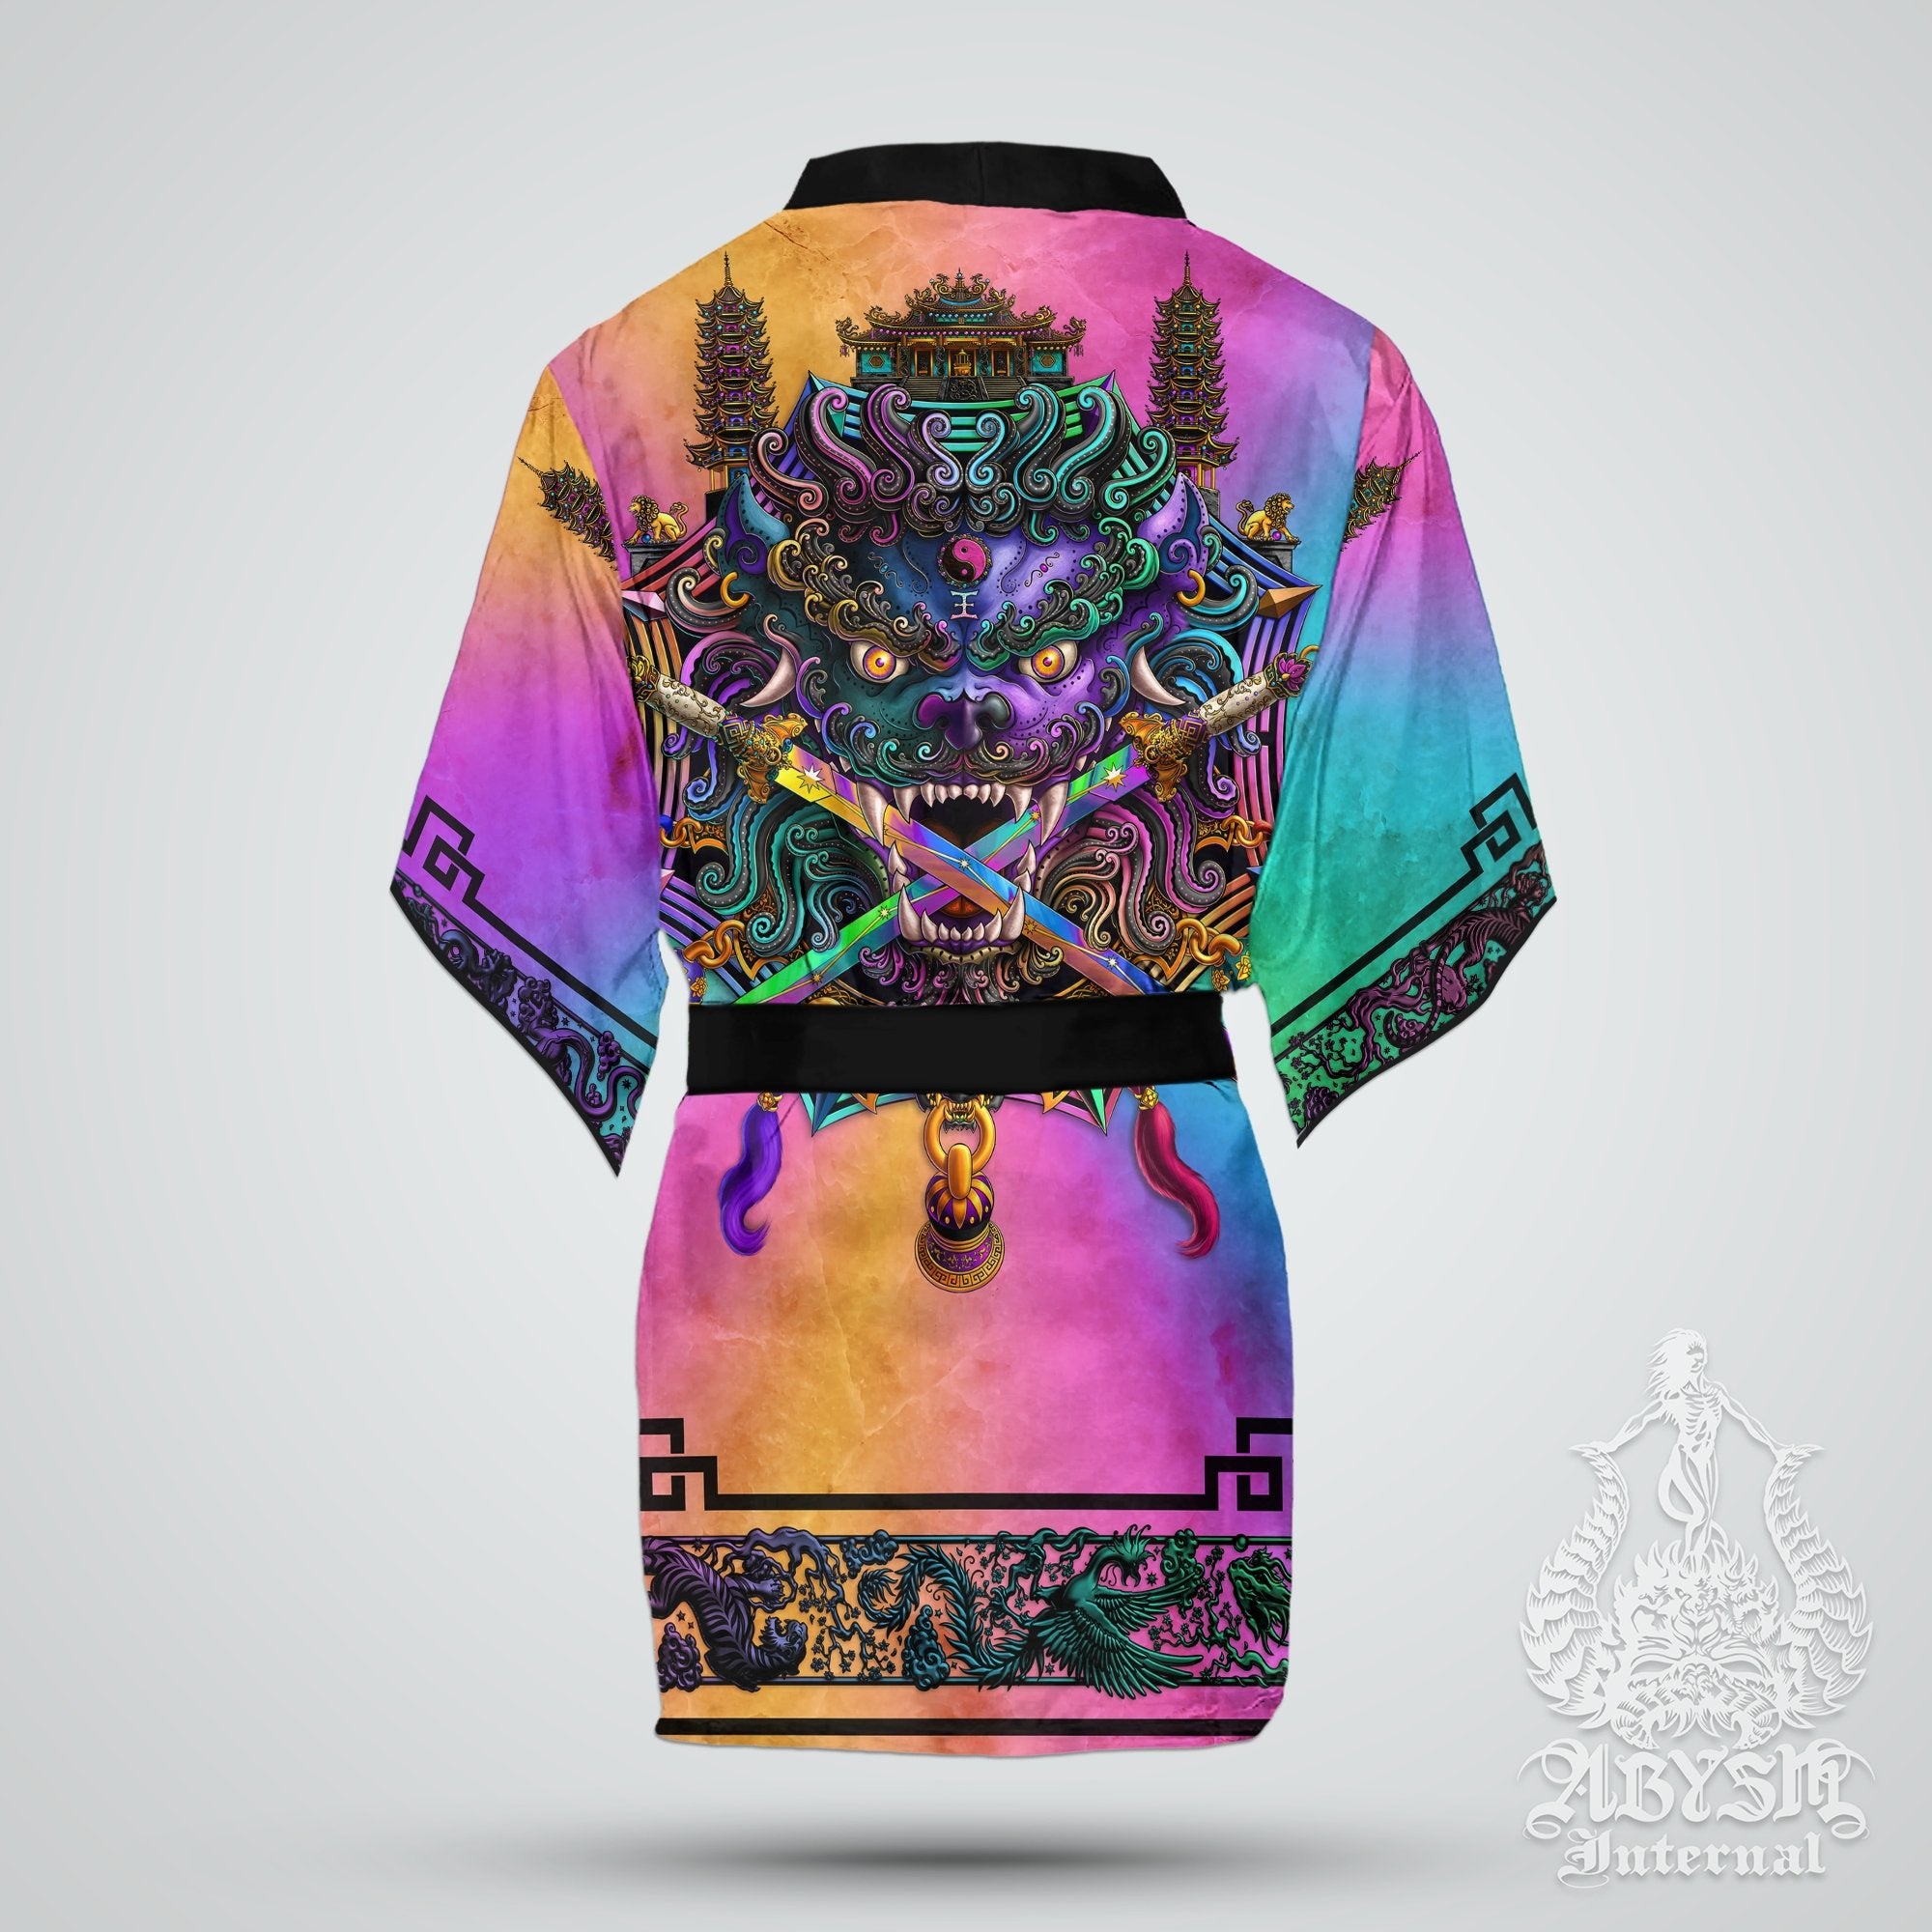 Sword Lion Cover Up, Beach Rave Outfit, Chinese Party Kimono, Taiwan Summer Festival Robe, Asian Indie and Alternative Clothing, Unisex - Holographic Pastel Punk Black - Abysm Internal